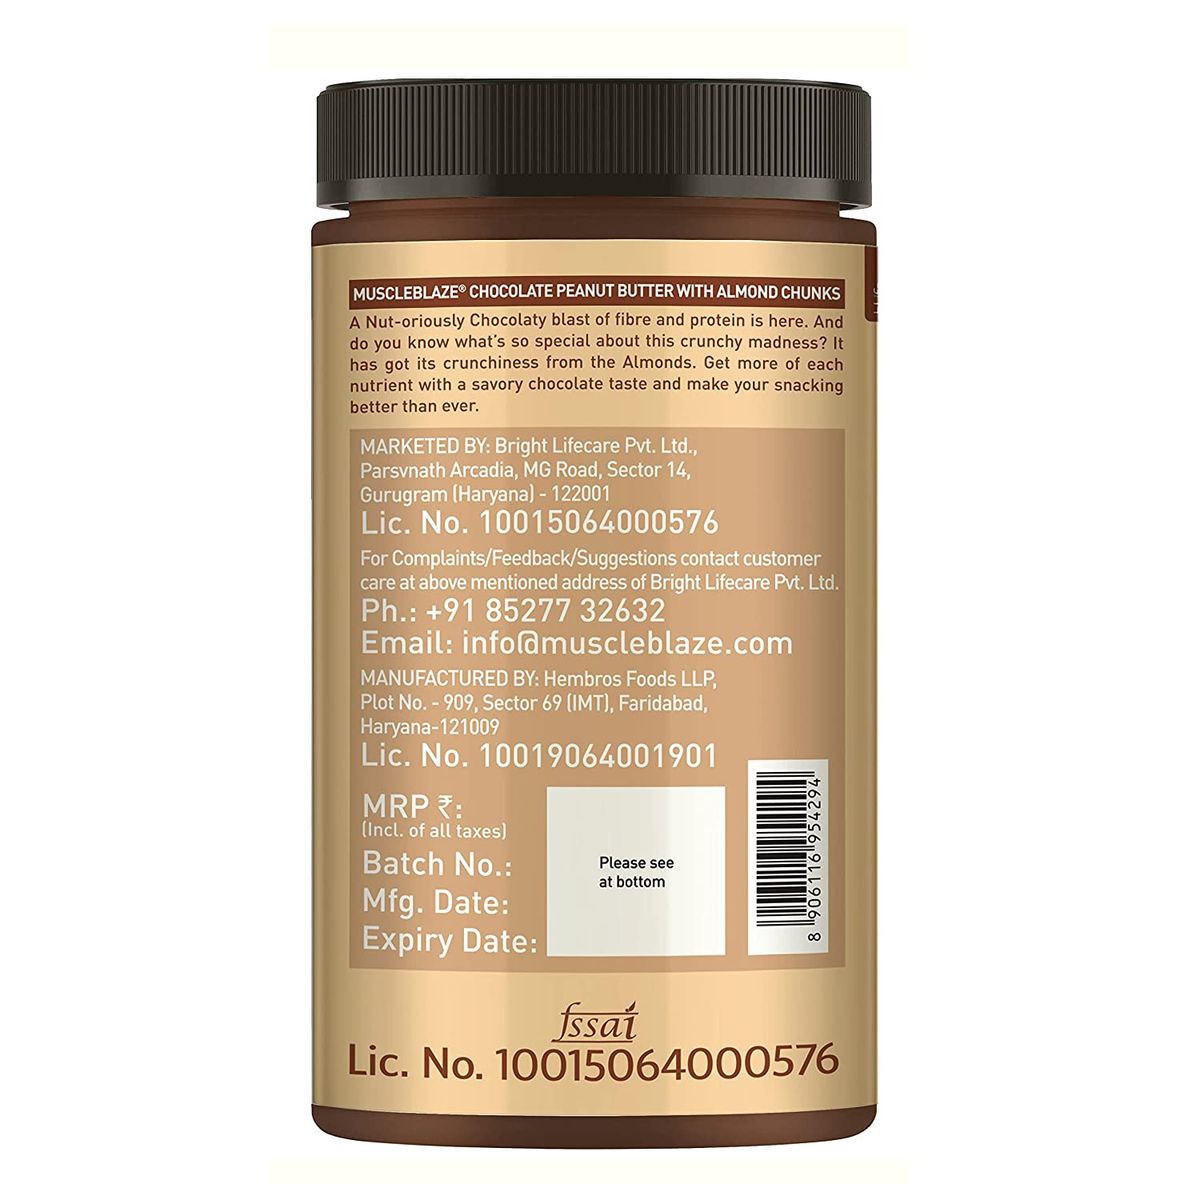 MuscleBlaze Chocolate Peanut Butter with Almond Chunks, 19% Protein, Chocolate Image